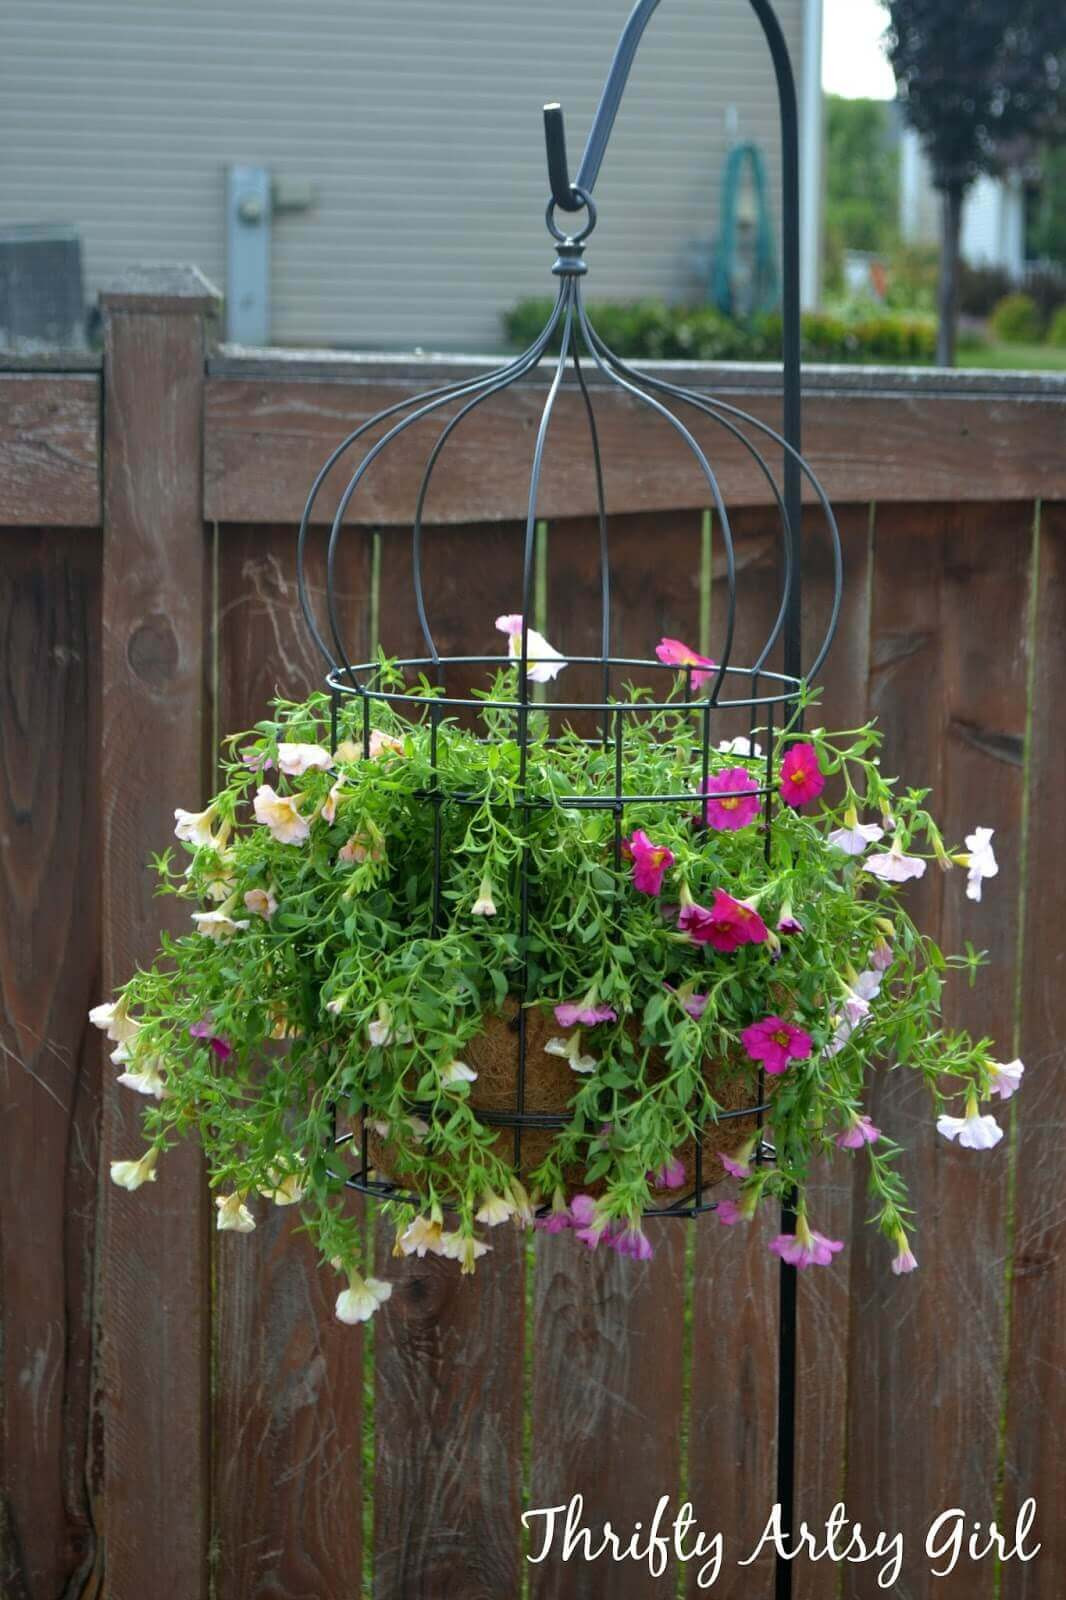 Backyard Planter Ideas
 45 Best Outdoor Hanging Planter Ideas and Designs for 2017